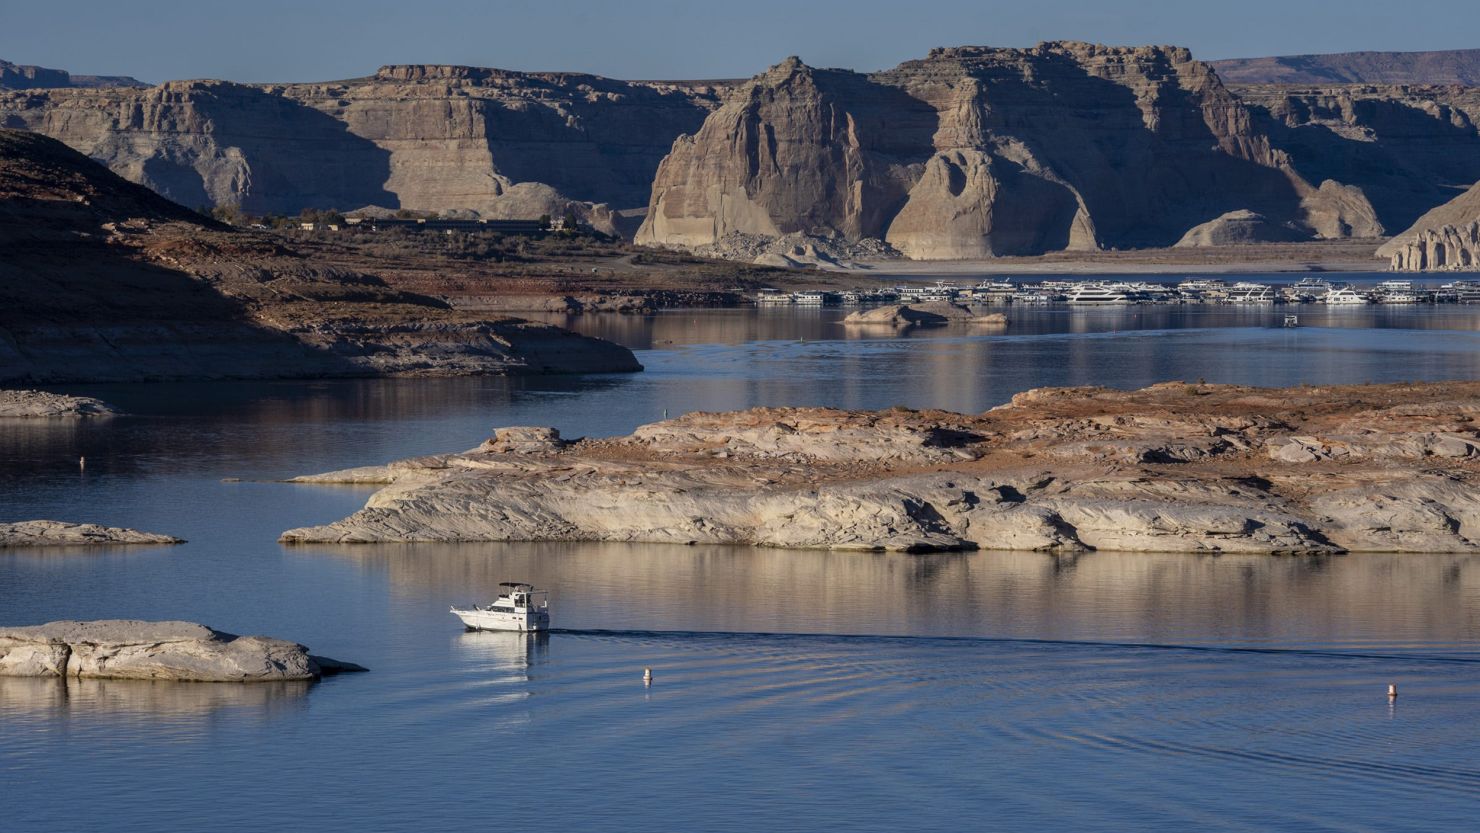 Lake Powell, the second largest reservoir on the Colorado River, hit the lowest water level since it was filled in 1963. 